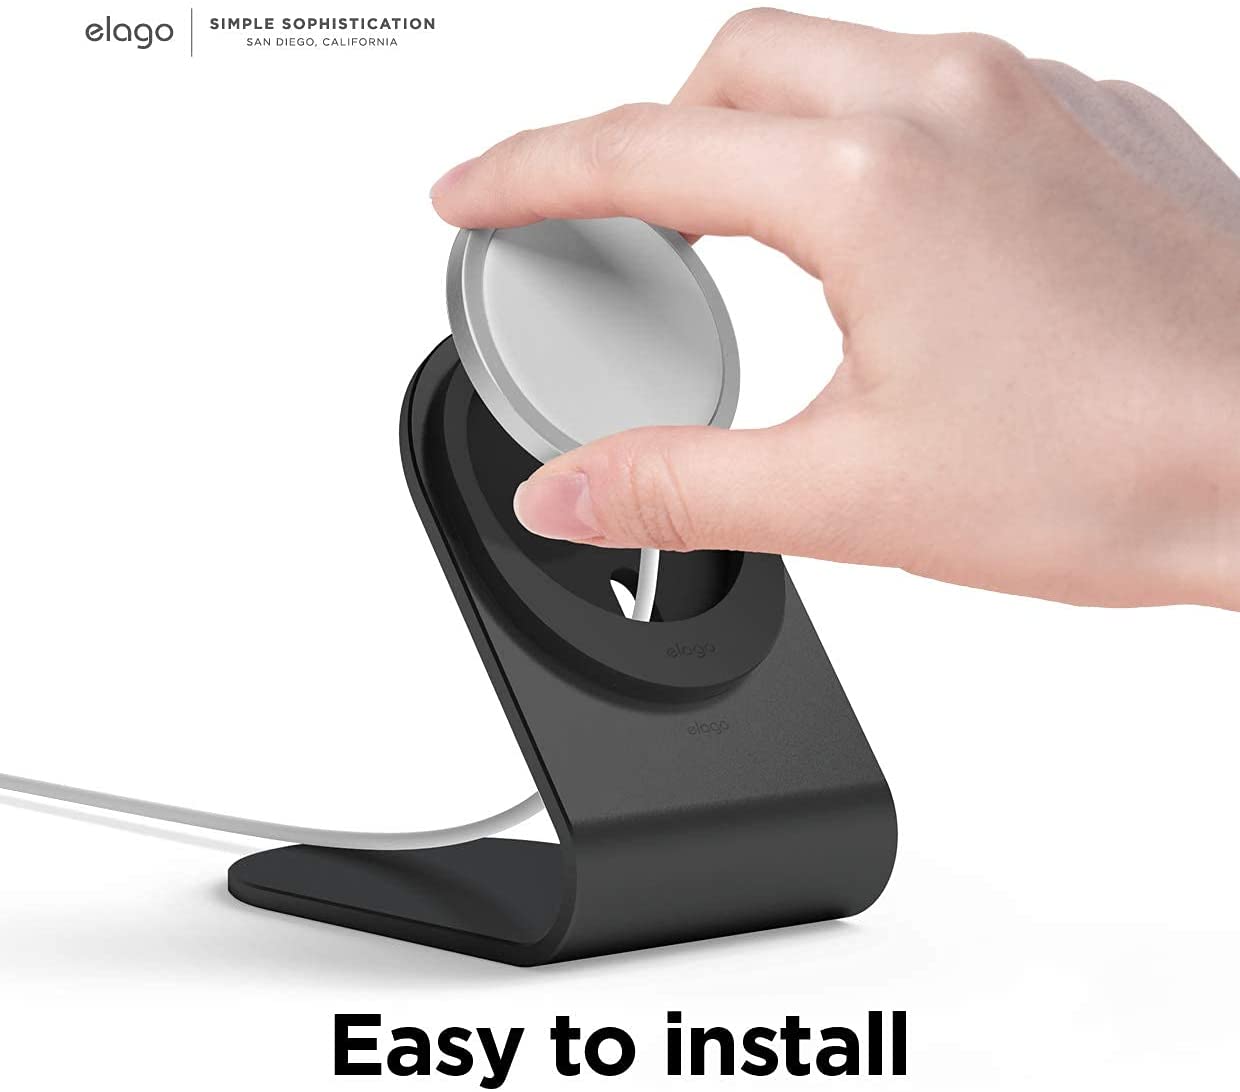 MagSafe installation is easy as shown with the Elago MS3 stand. 